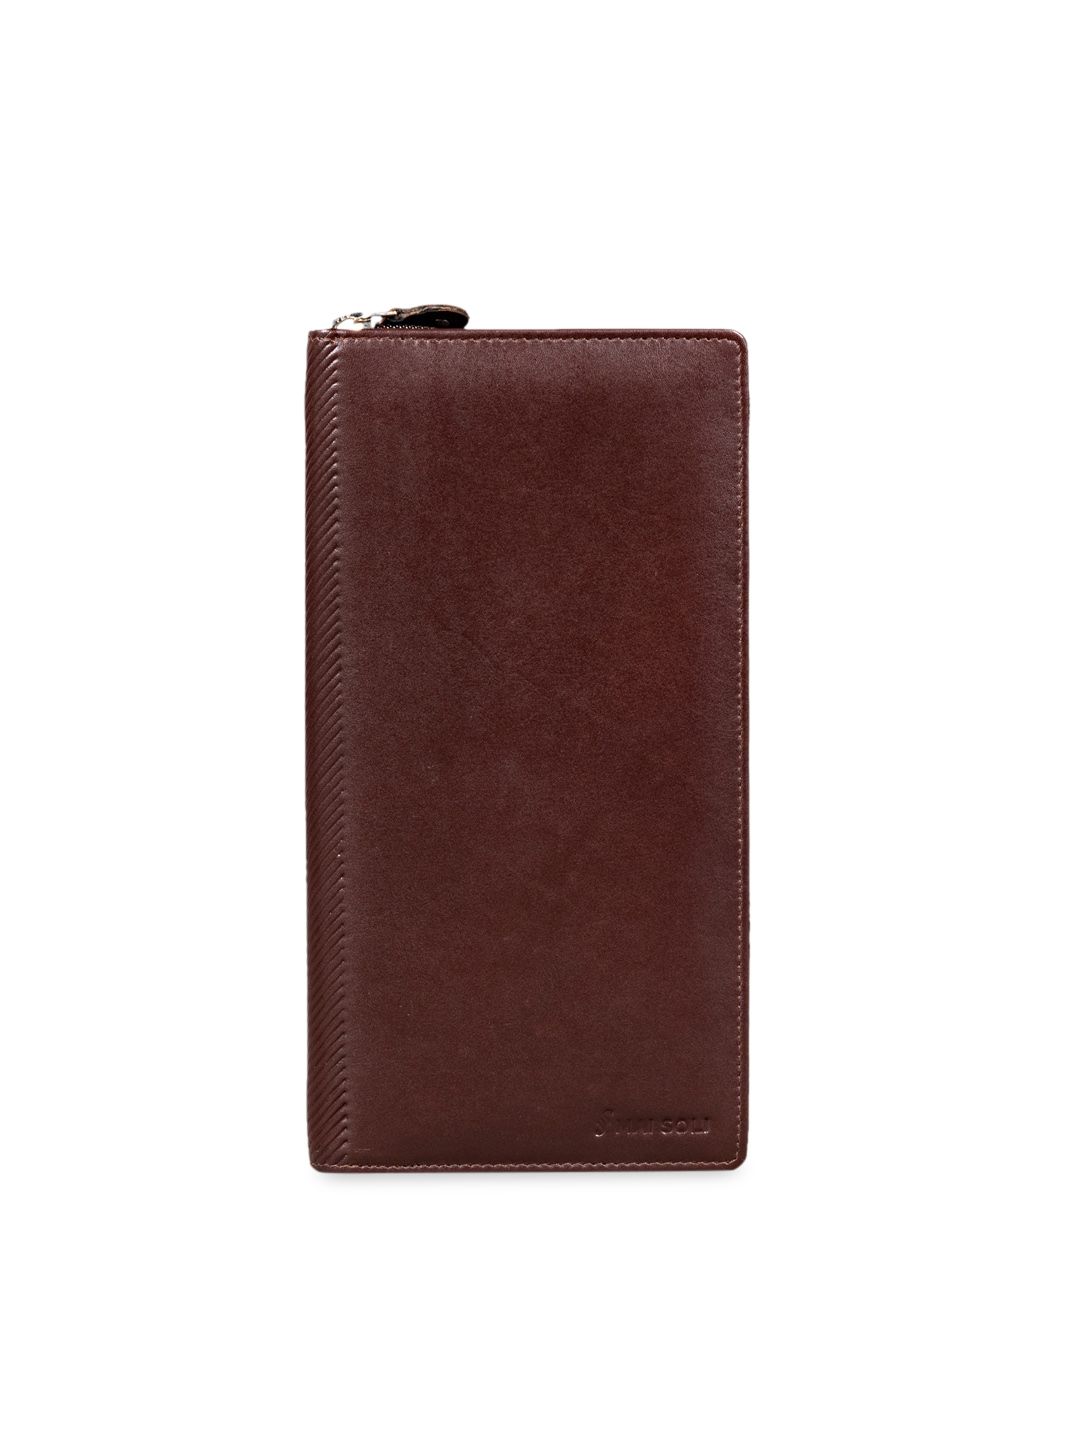 MAI SOLI Unisex Brown Solid Leather Card Holder Price in India